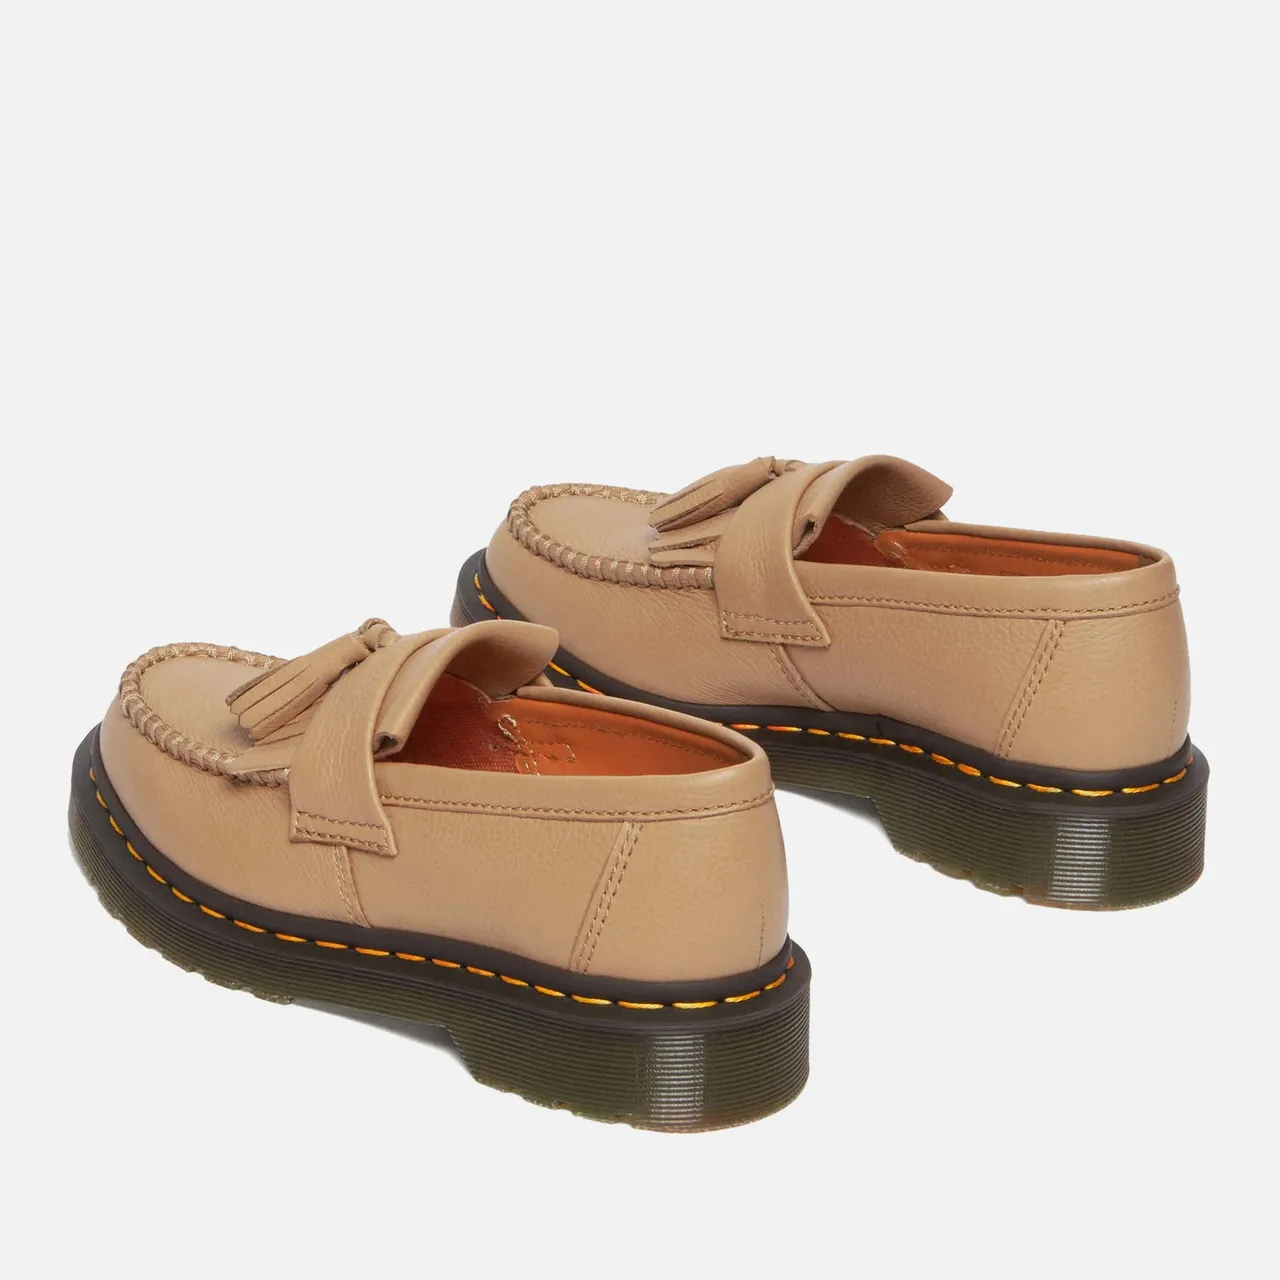 Dr. Martens Adrian Virginia Leather Loafers - UK